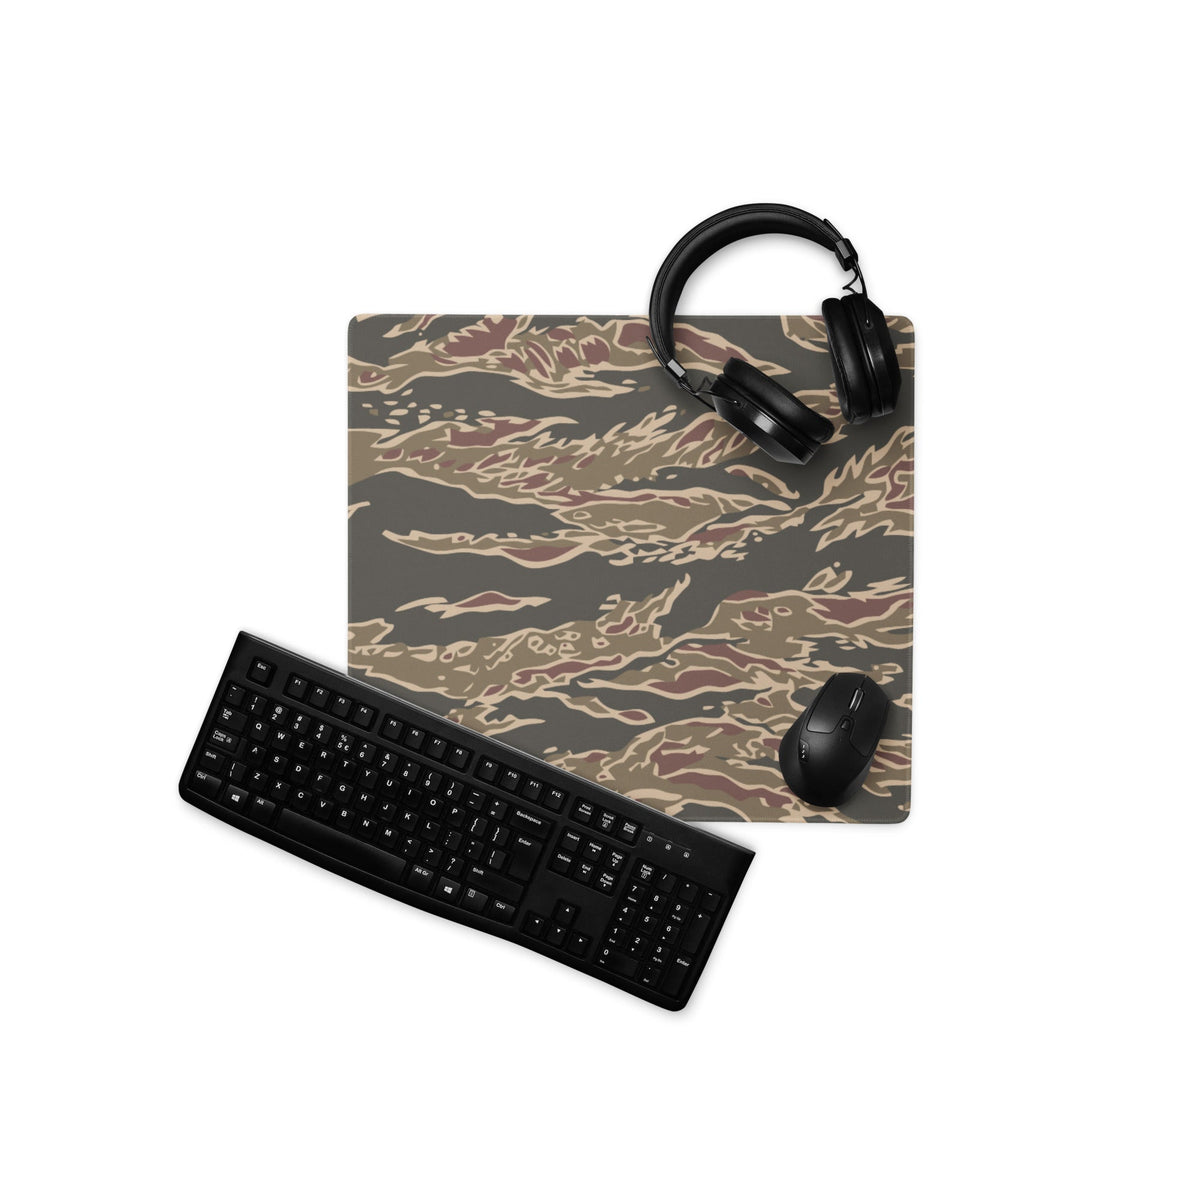 Taiwan Special Forces Red Tiger Stripe CAMO Gaming mouse pad - 18″×16″